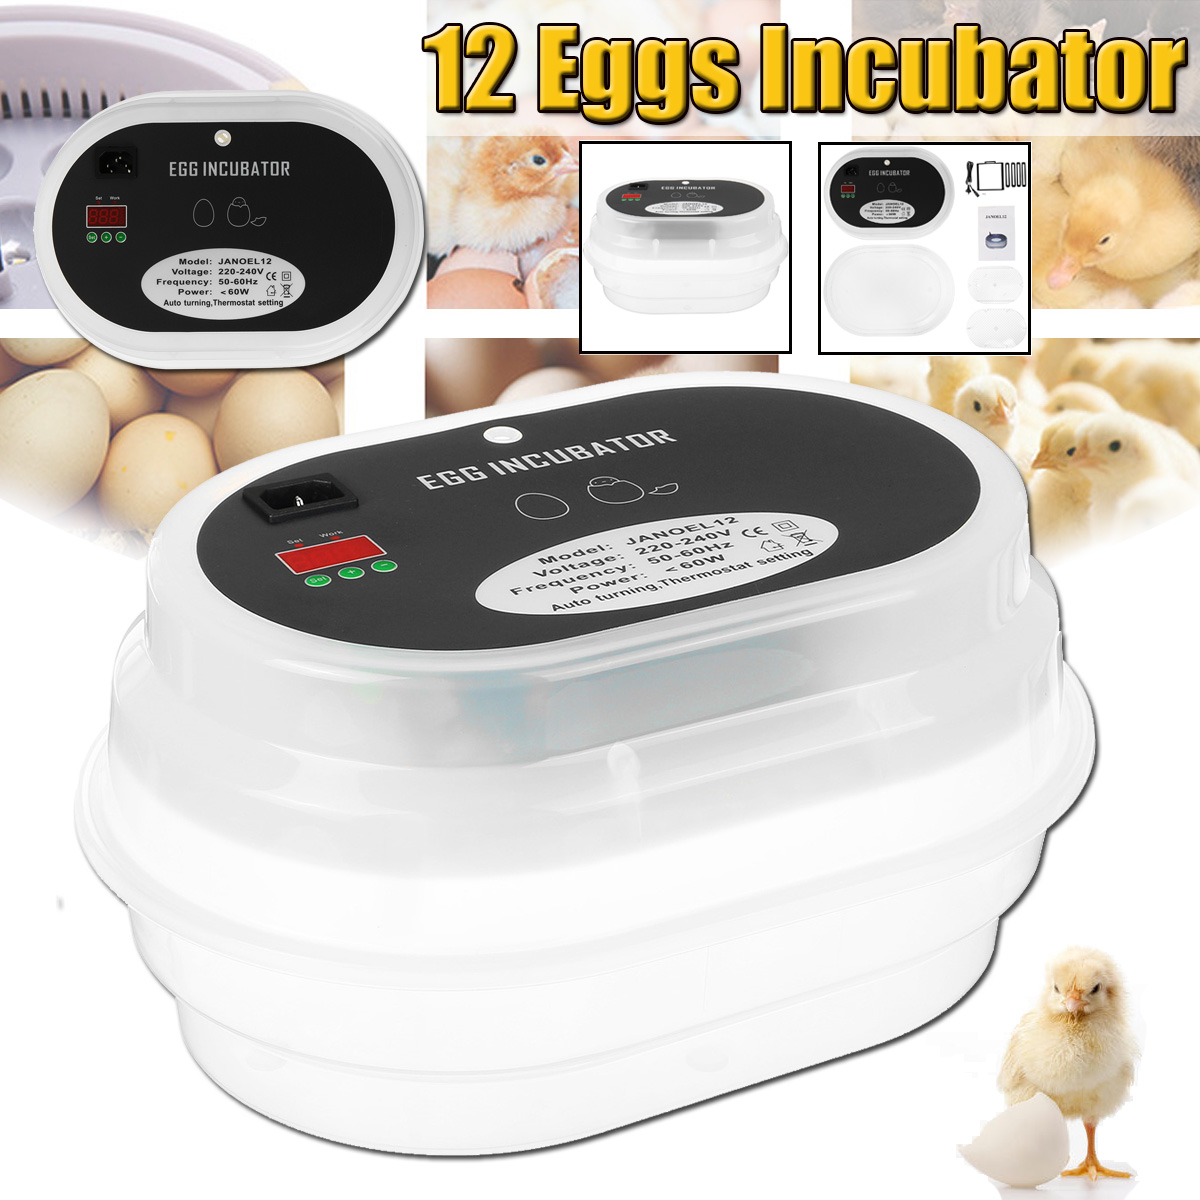 12-Eggs-Incubator-Fully-Automatic-Chicken-Poultry-Duck-Quail-Egg-Hatcher-1742597-1